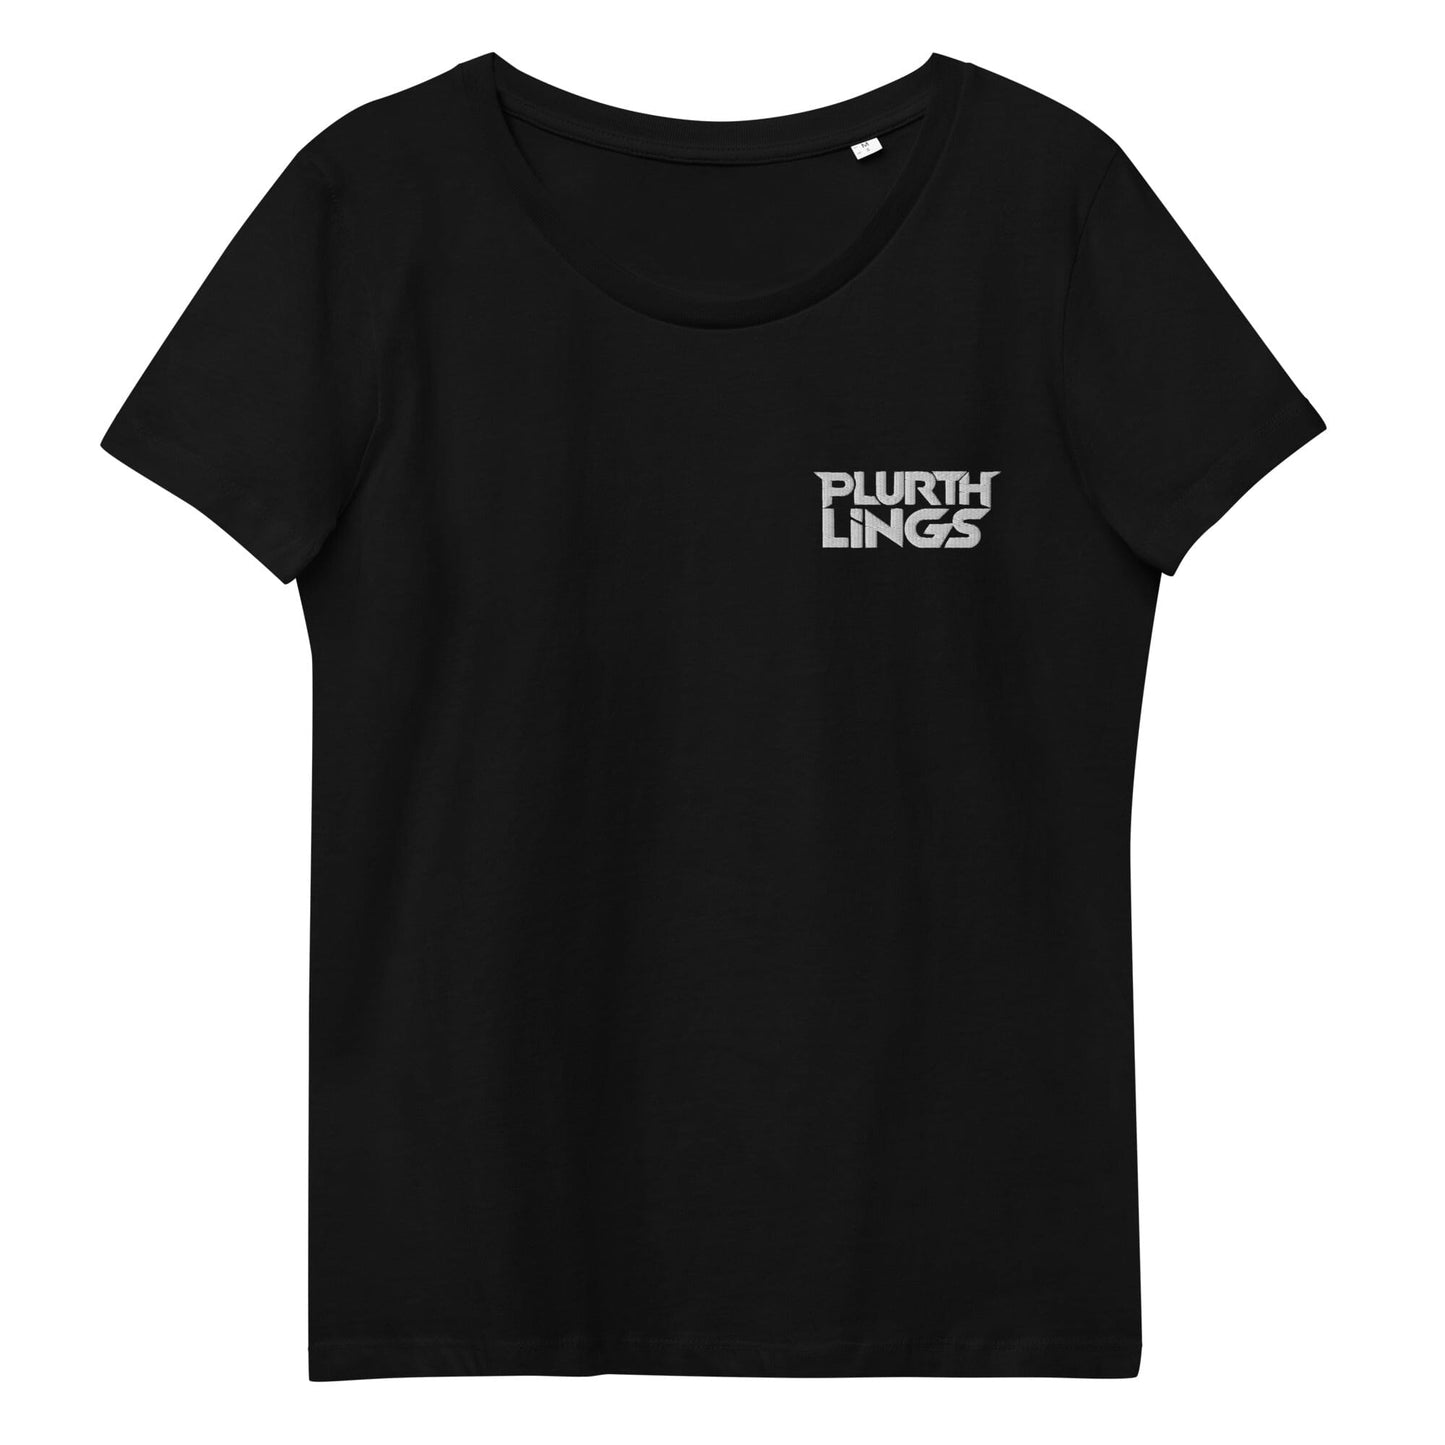 Plurthlings Embroidered Women's Fitted Eco Tee PLURTHLINGS 